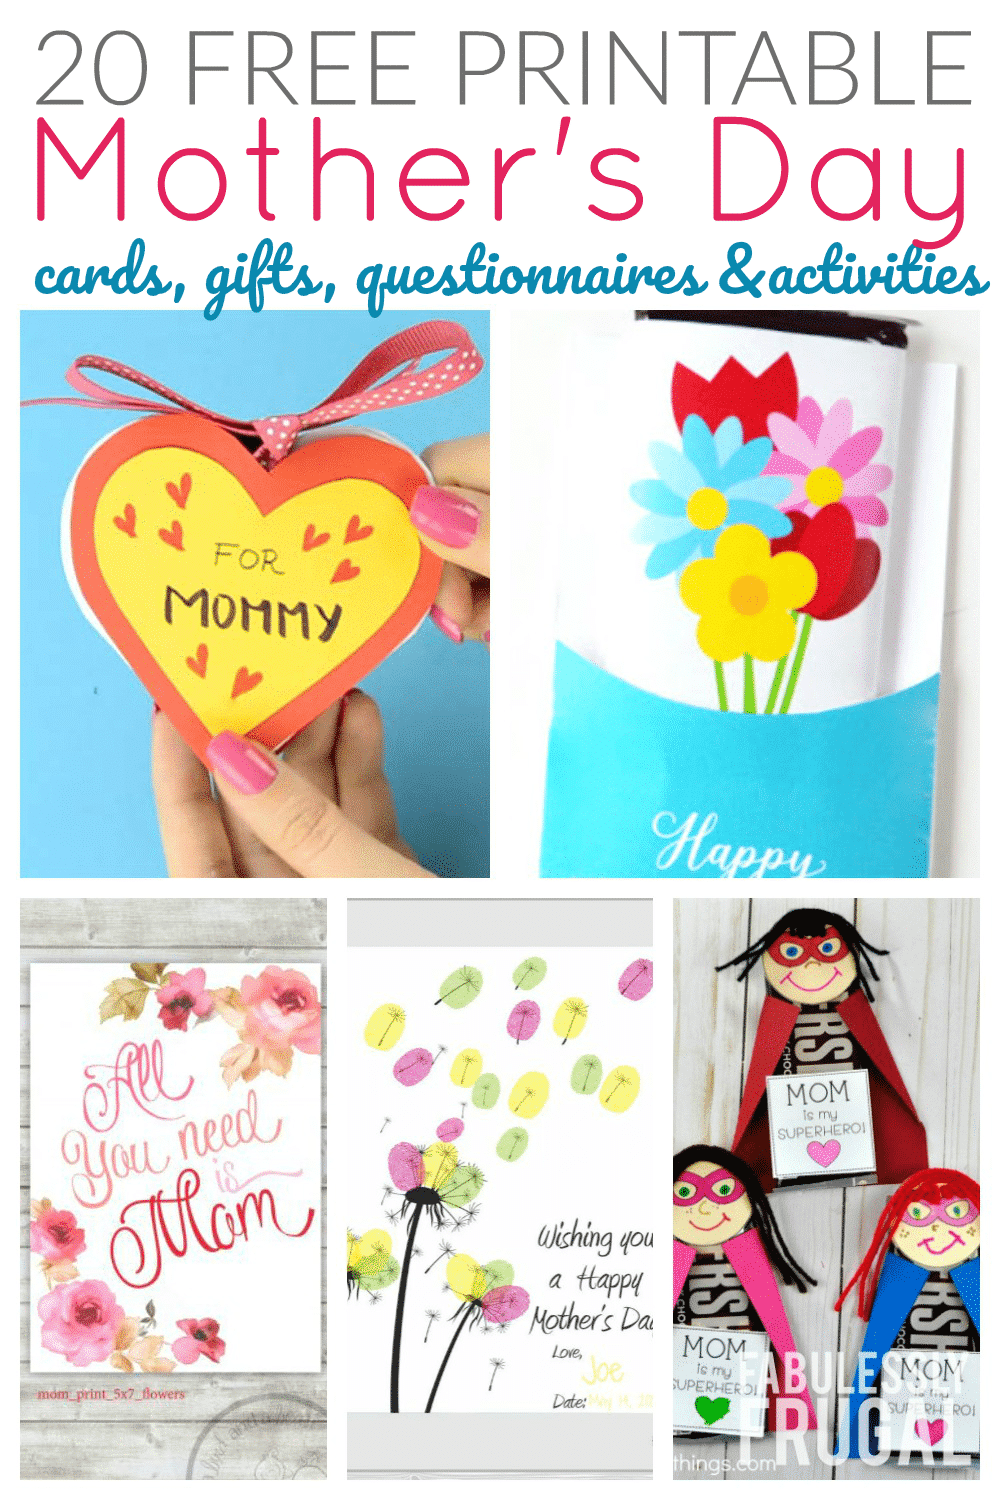 20 free Mother's Day Printables, Gifts, Cards, and Questionairres